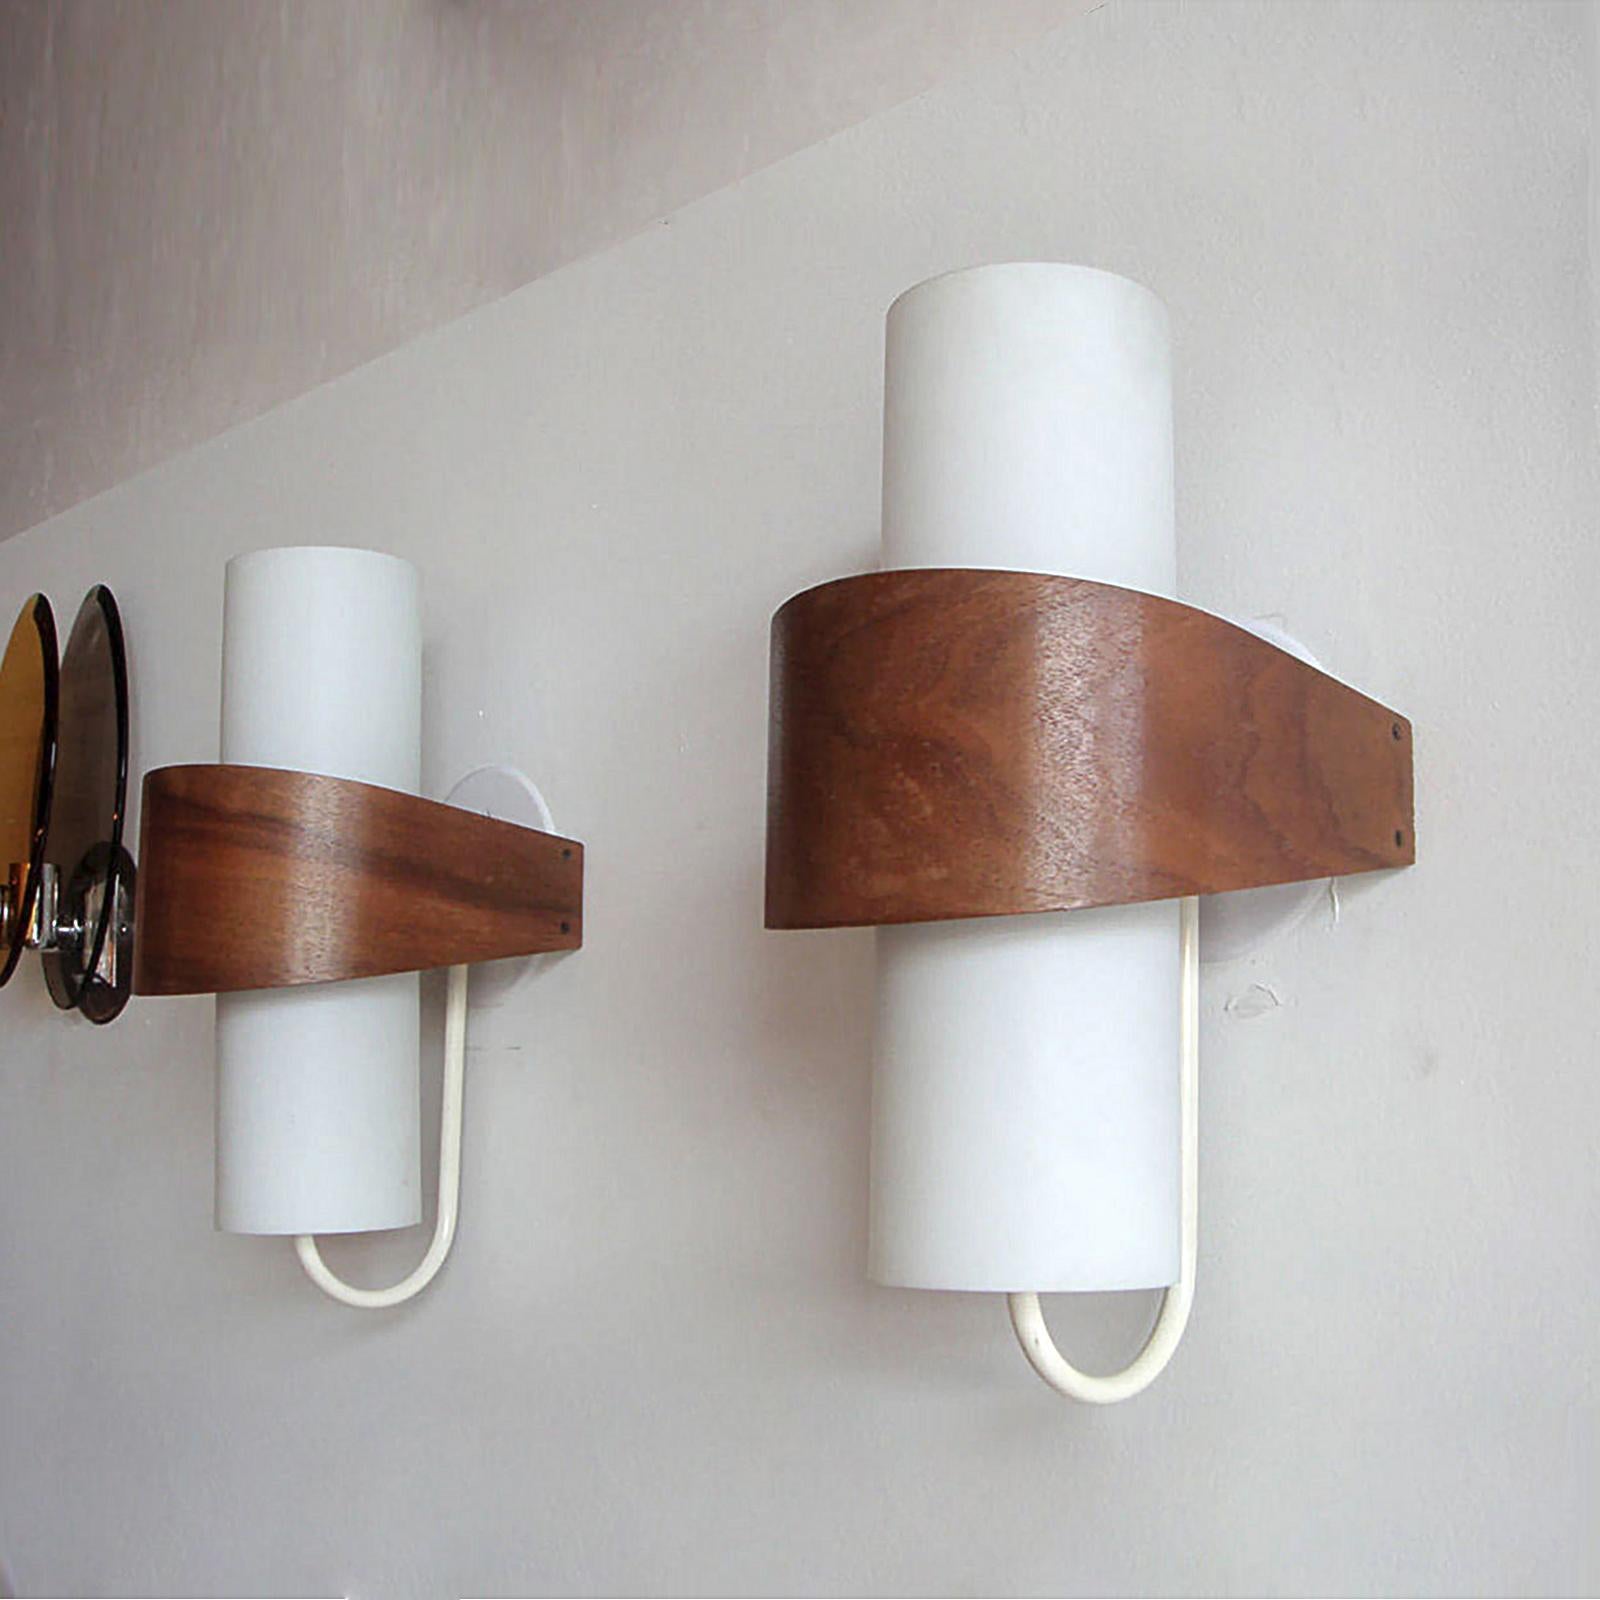 Elegant geometric sconces composed of opaque glass cylinders with a teak veneer wrap, wired for US standards, dimmable, one E27 socket per fixture, max. wattage 75w or LED equivalent, bulb provided as a onetime courtesy. Priced individually.